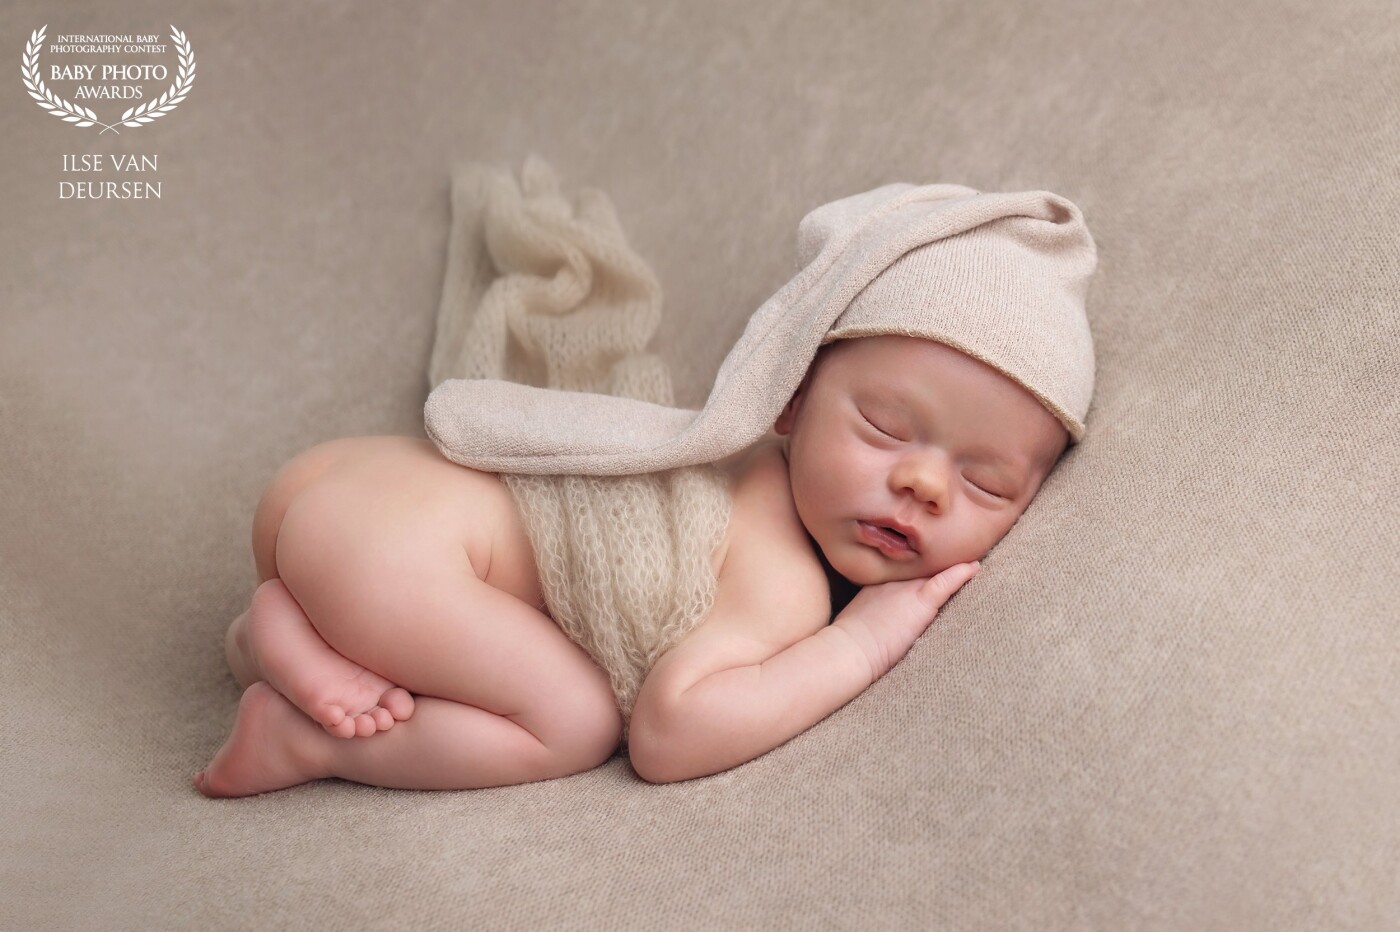 No words for this boy. Born 5 weeks too early but what a champ! He slept quietly through the whole session and was a real gift for the photographer.